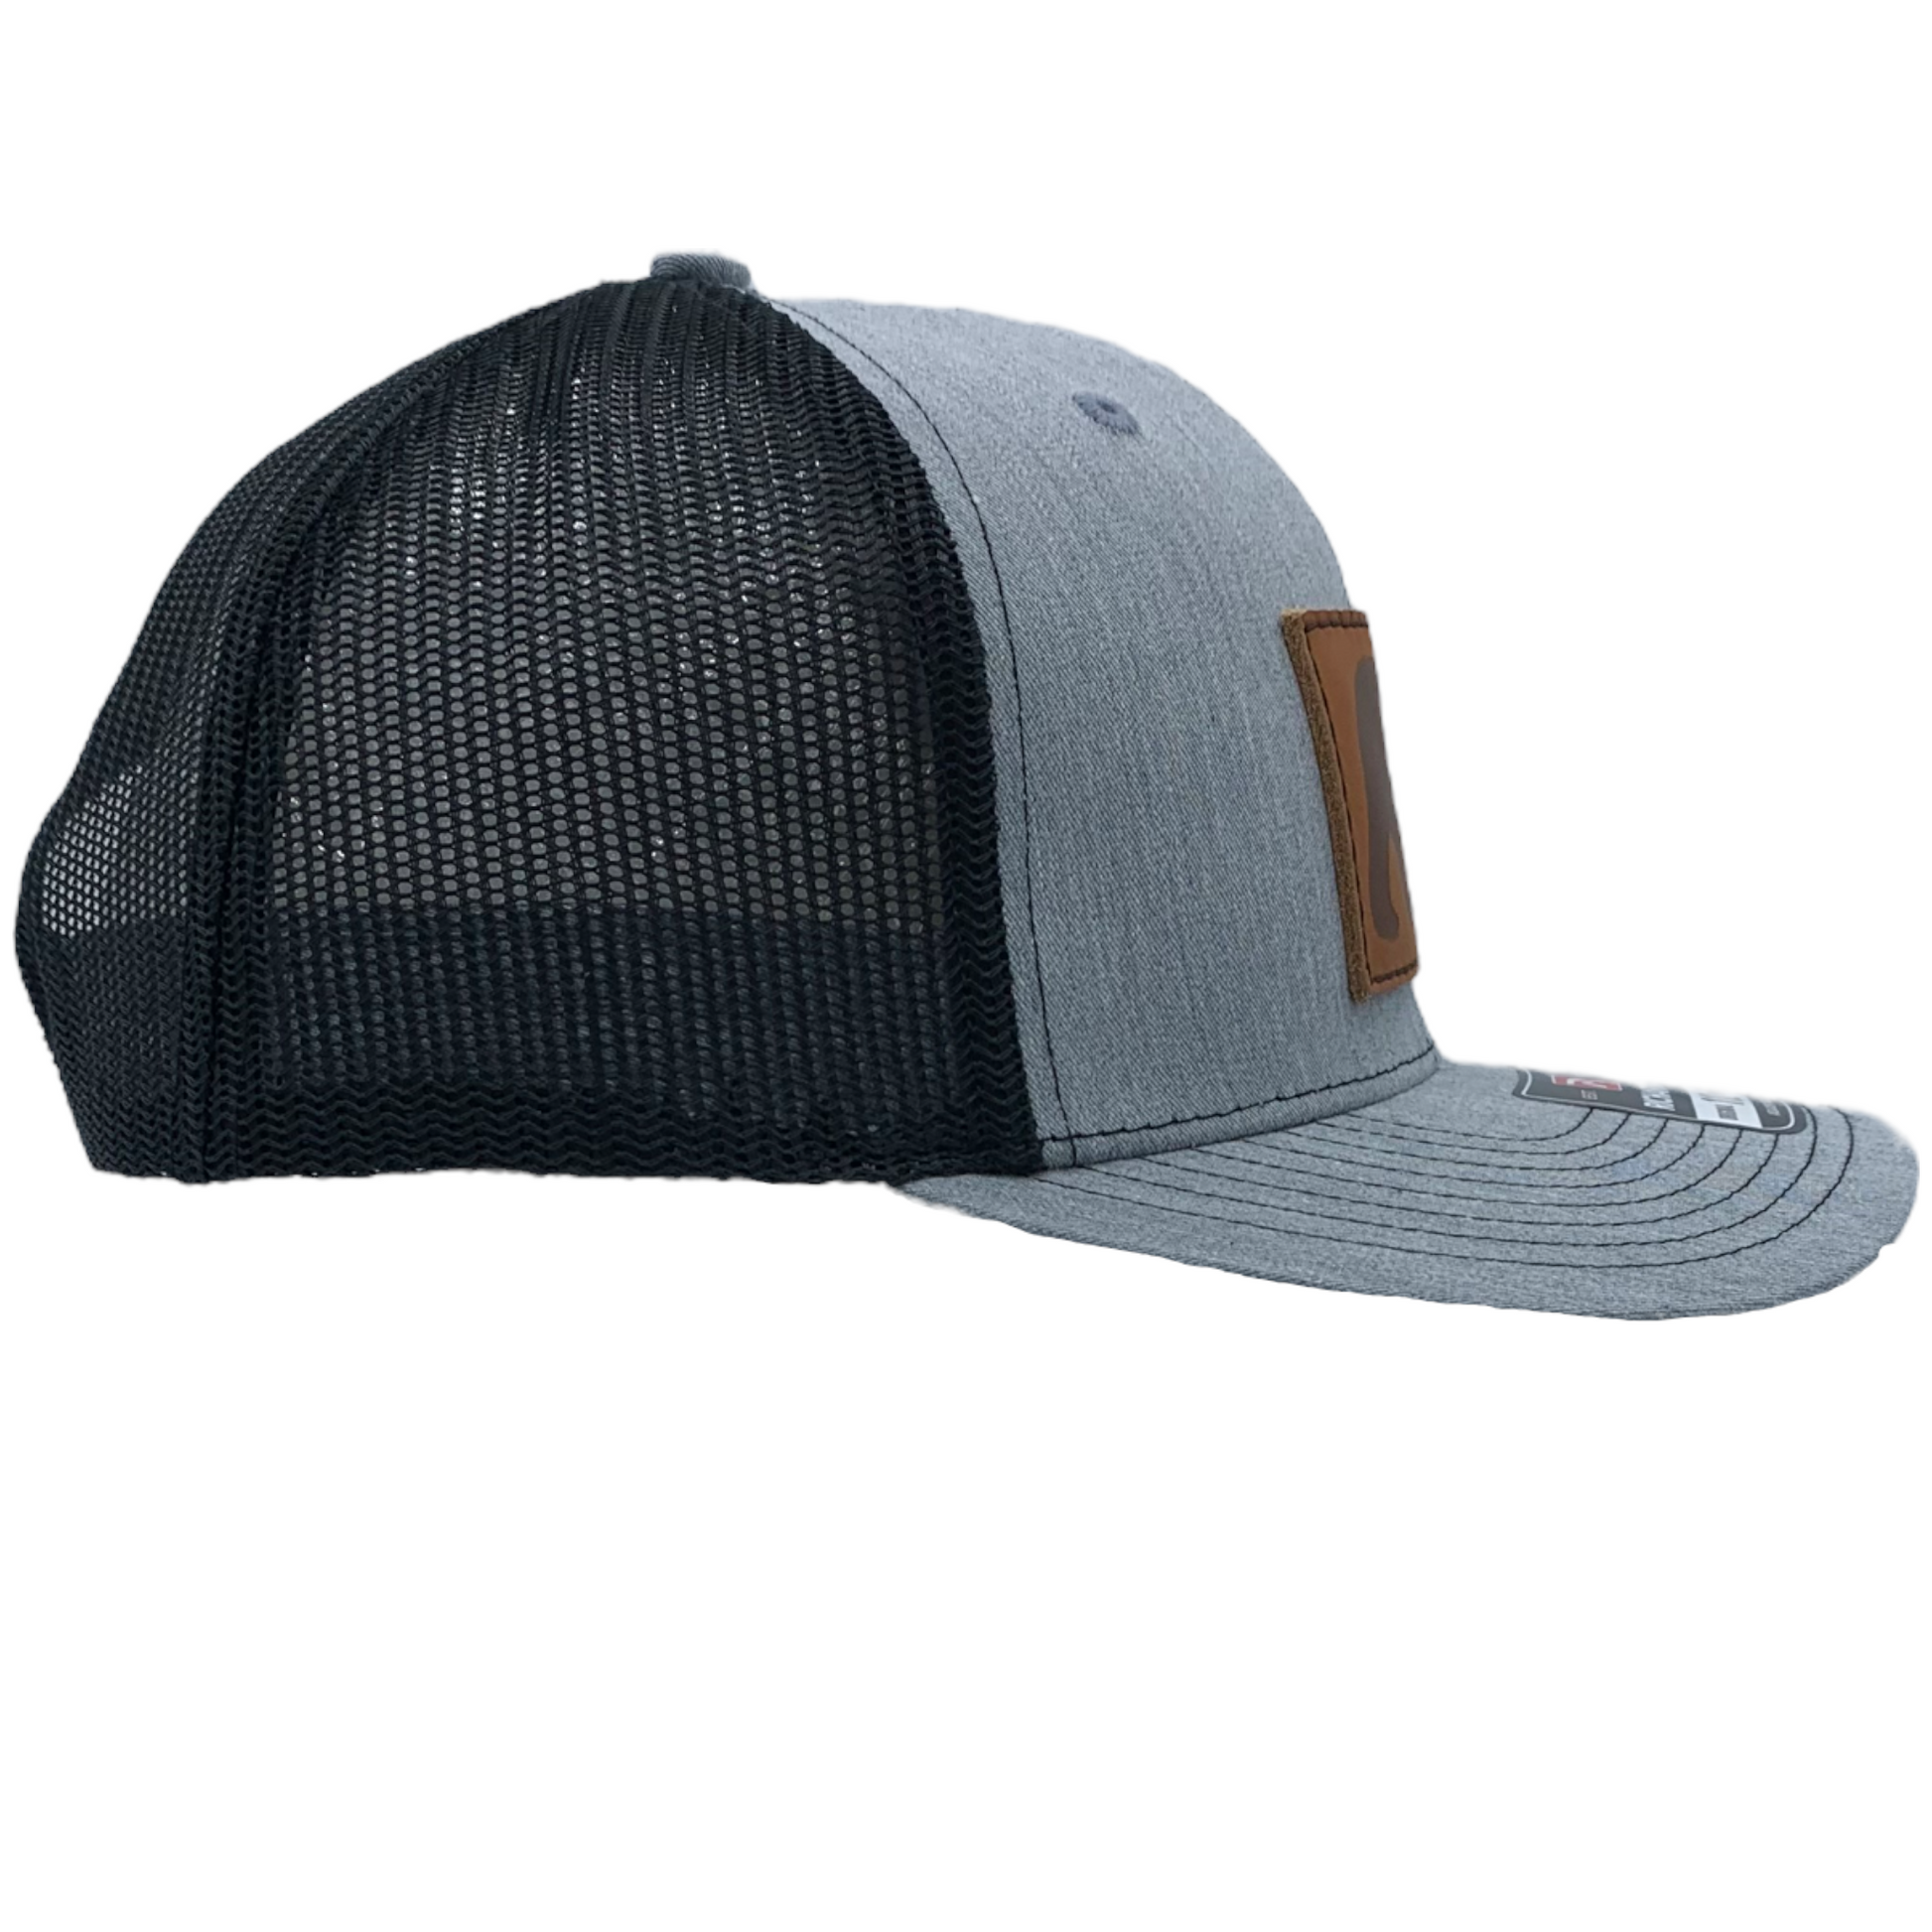 Burton Leather Patch Trucker Baseball Hat Grey and Black - The ASHEVILLE Co. TM